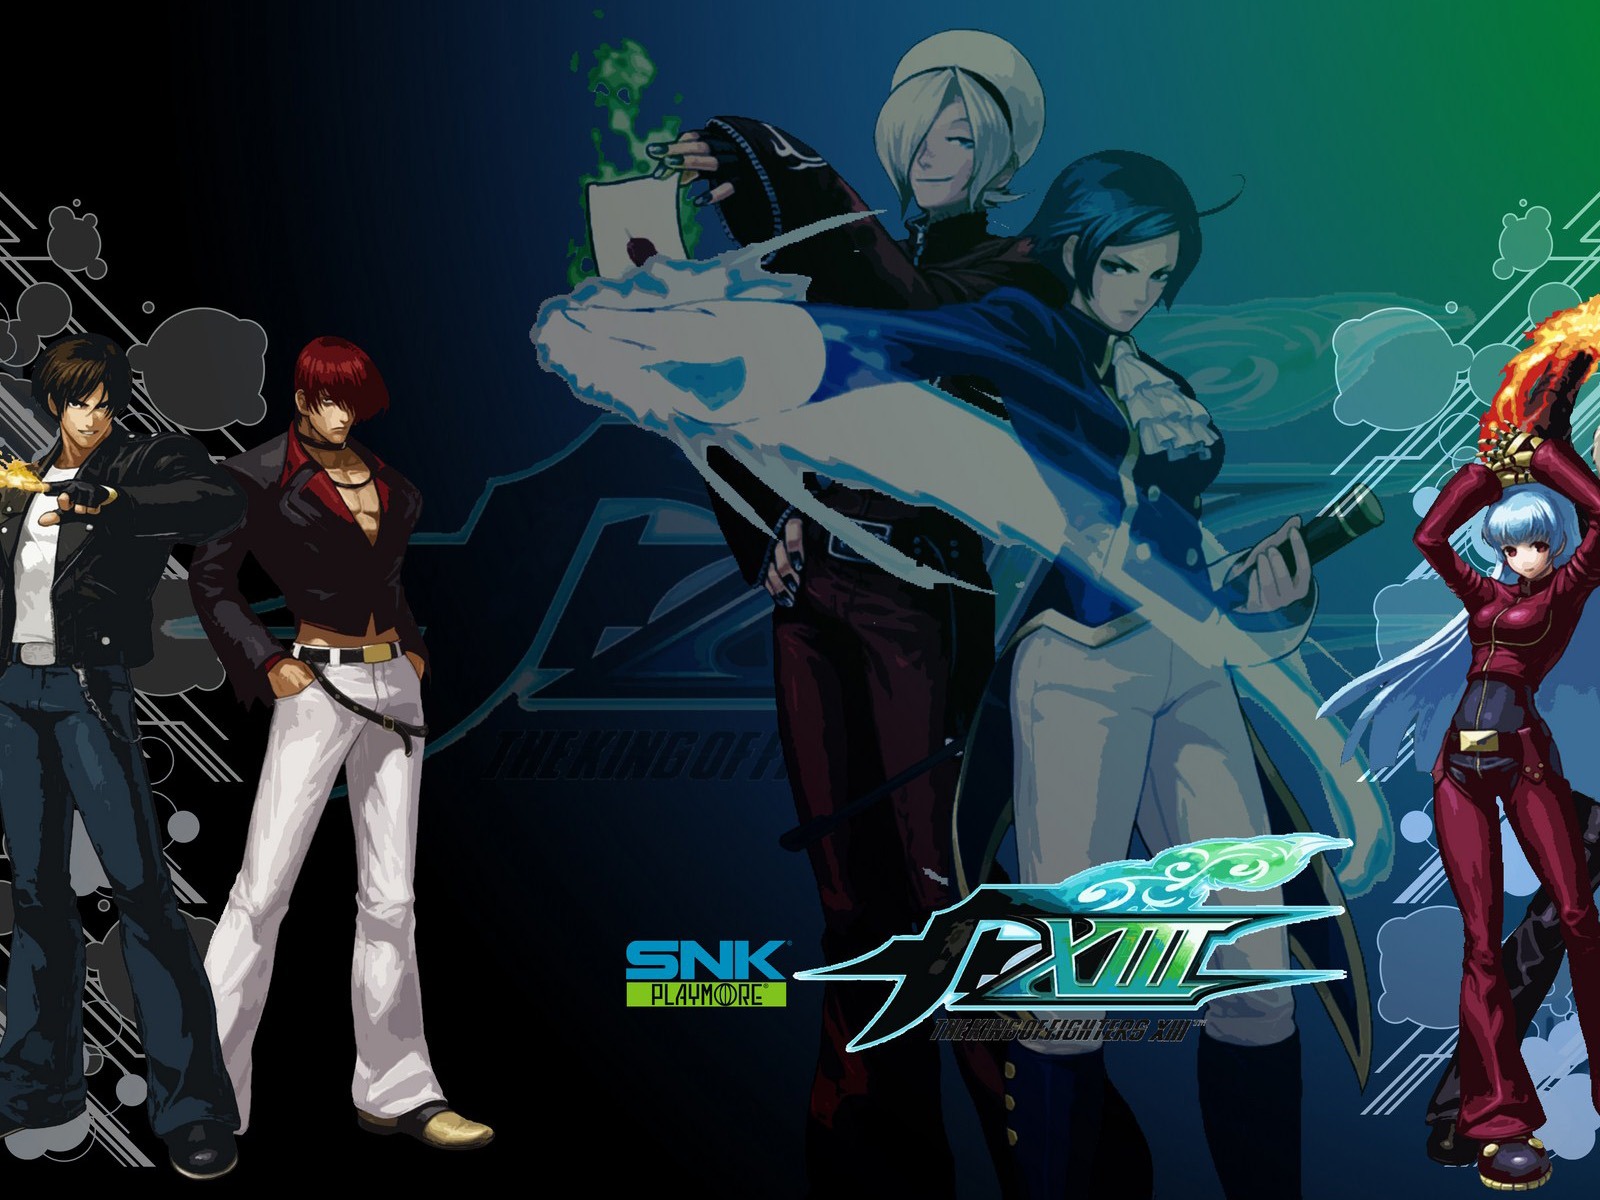 The King of Fighters XIII wallpapers #4 - 1600x1200